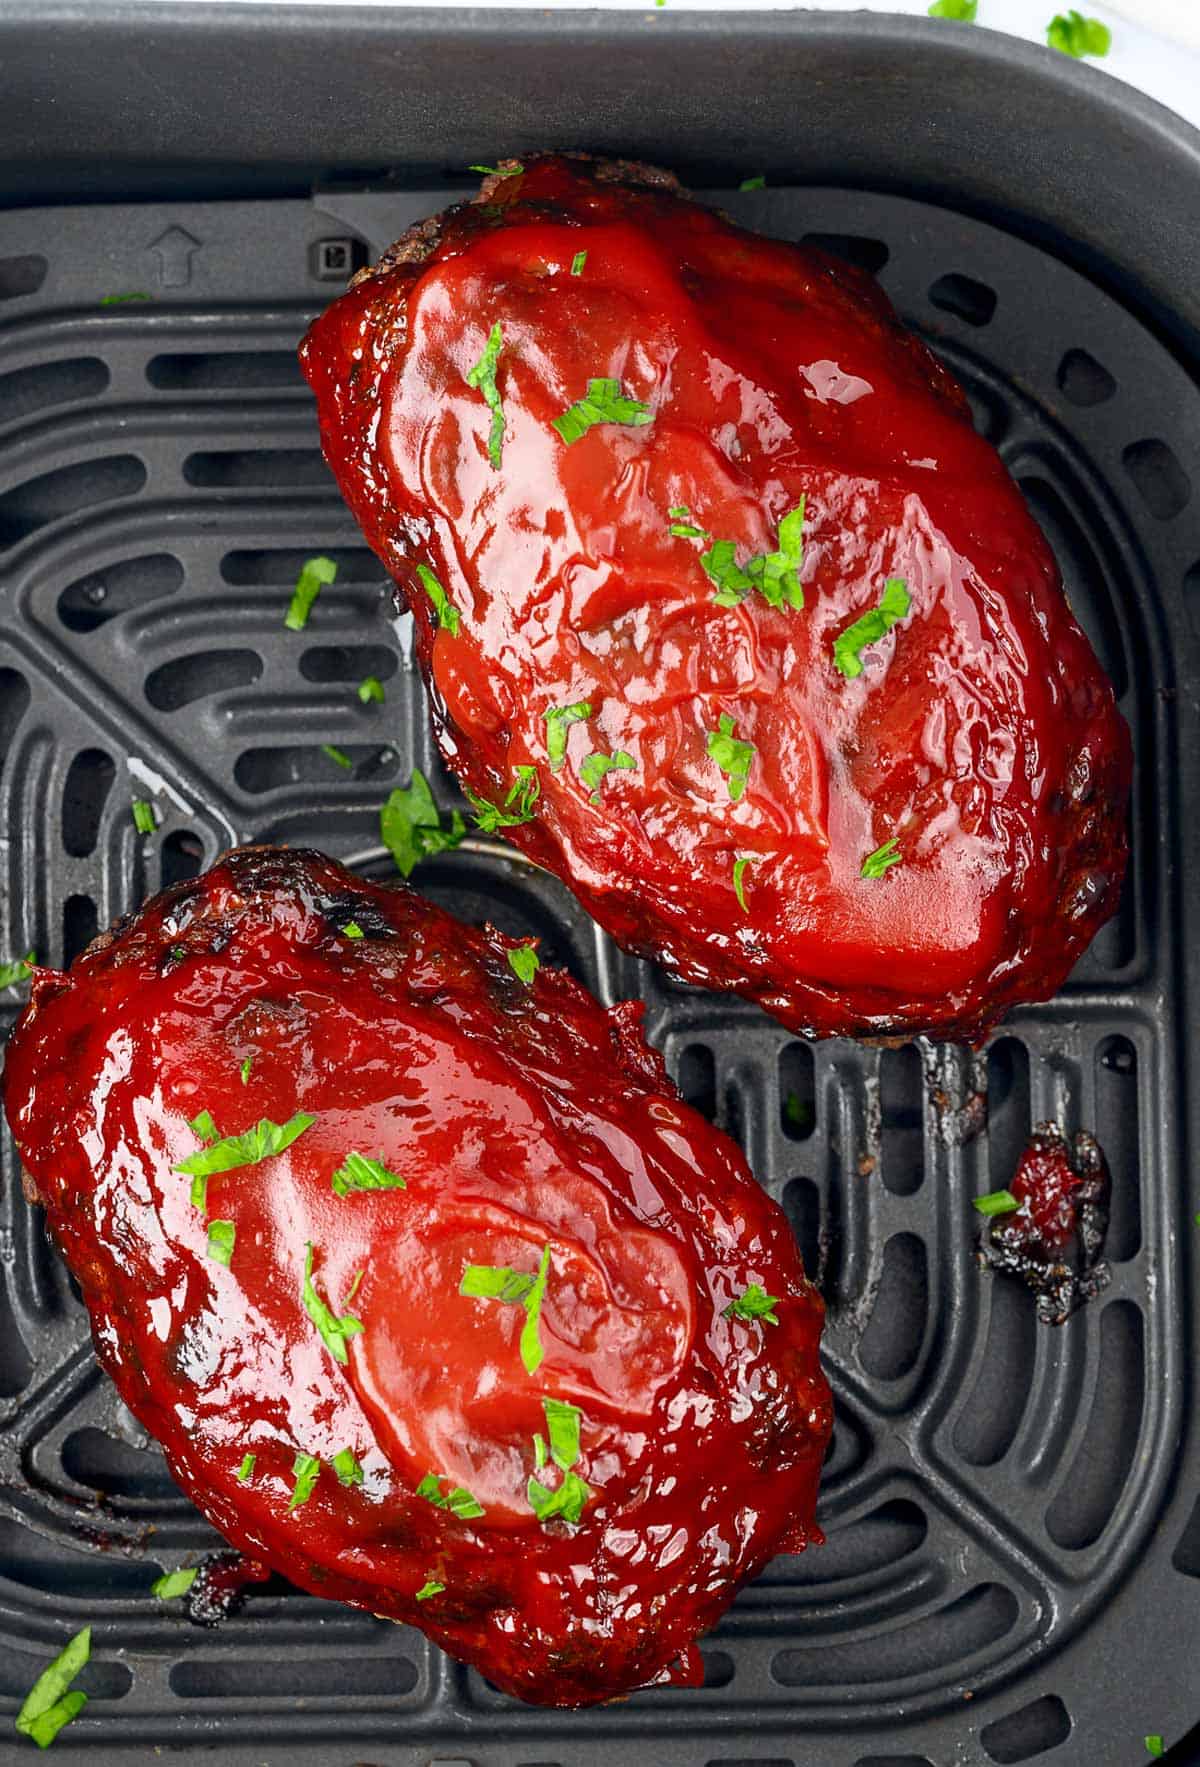 Two air fried meatloaves in the air fryer basket. #airfryermeatloaf #recipe #recipe #easy #airfryer #best #groundbeef